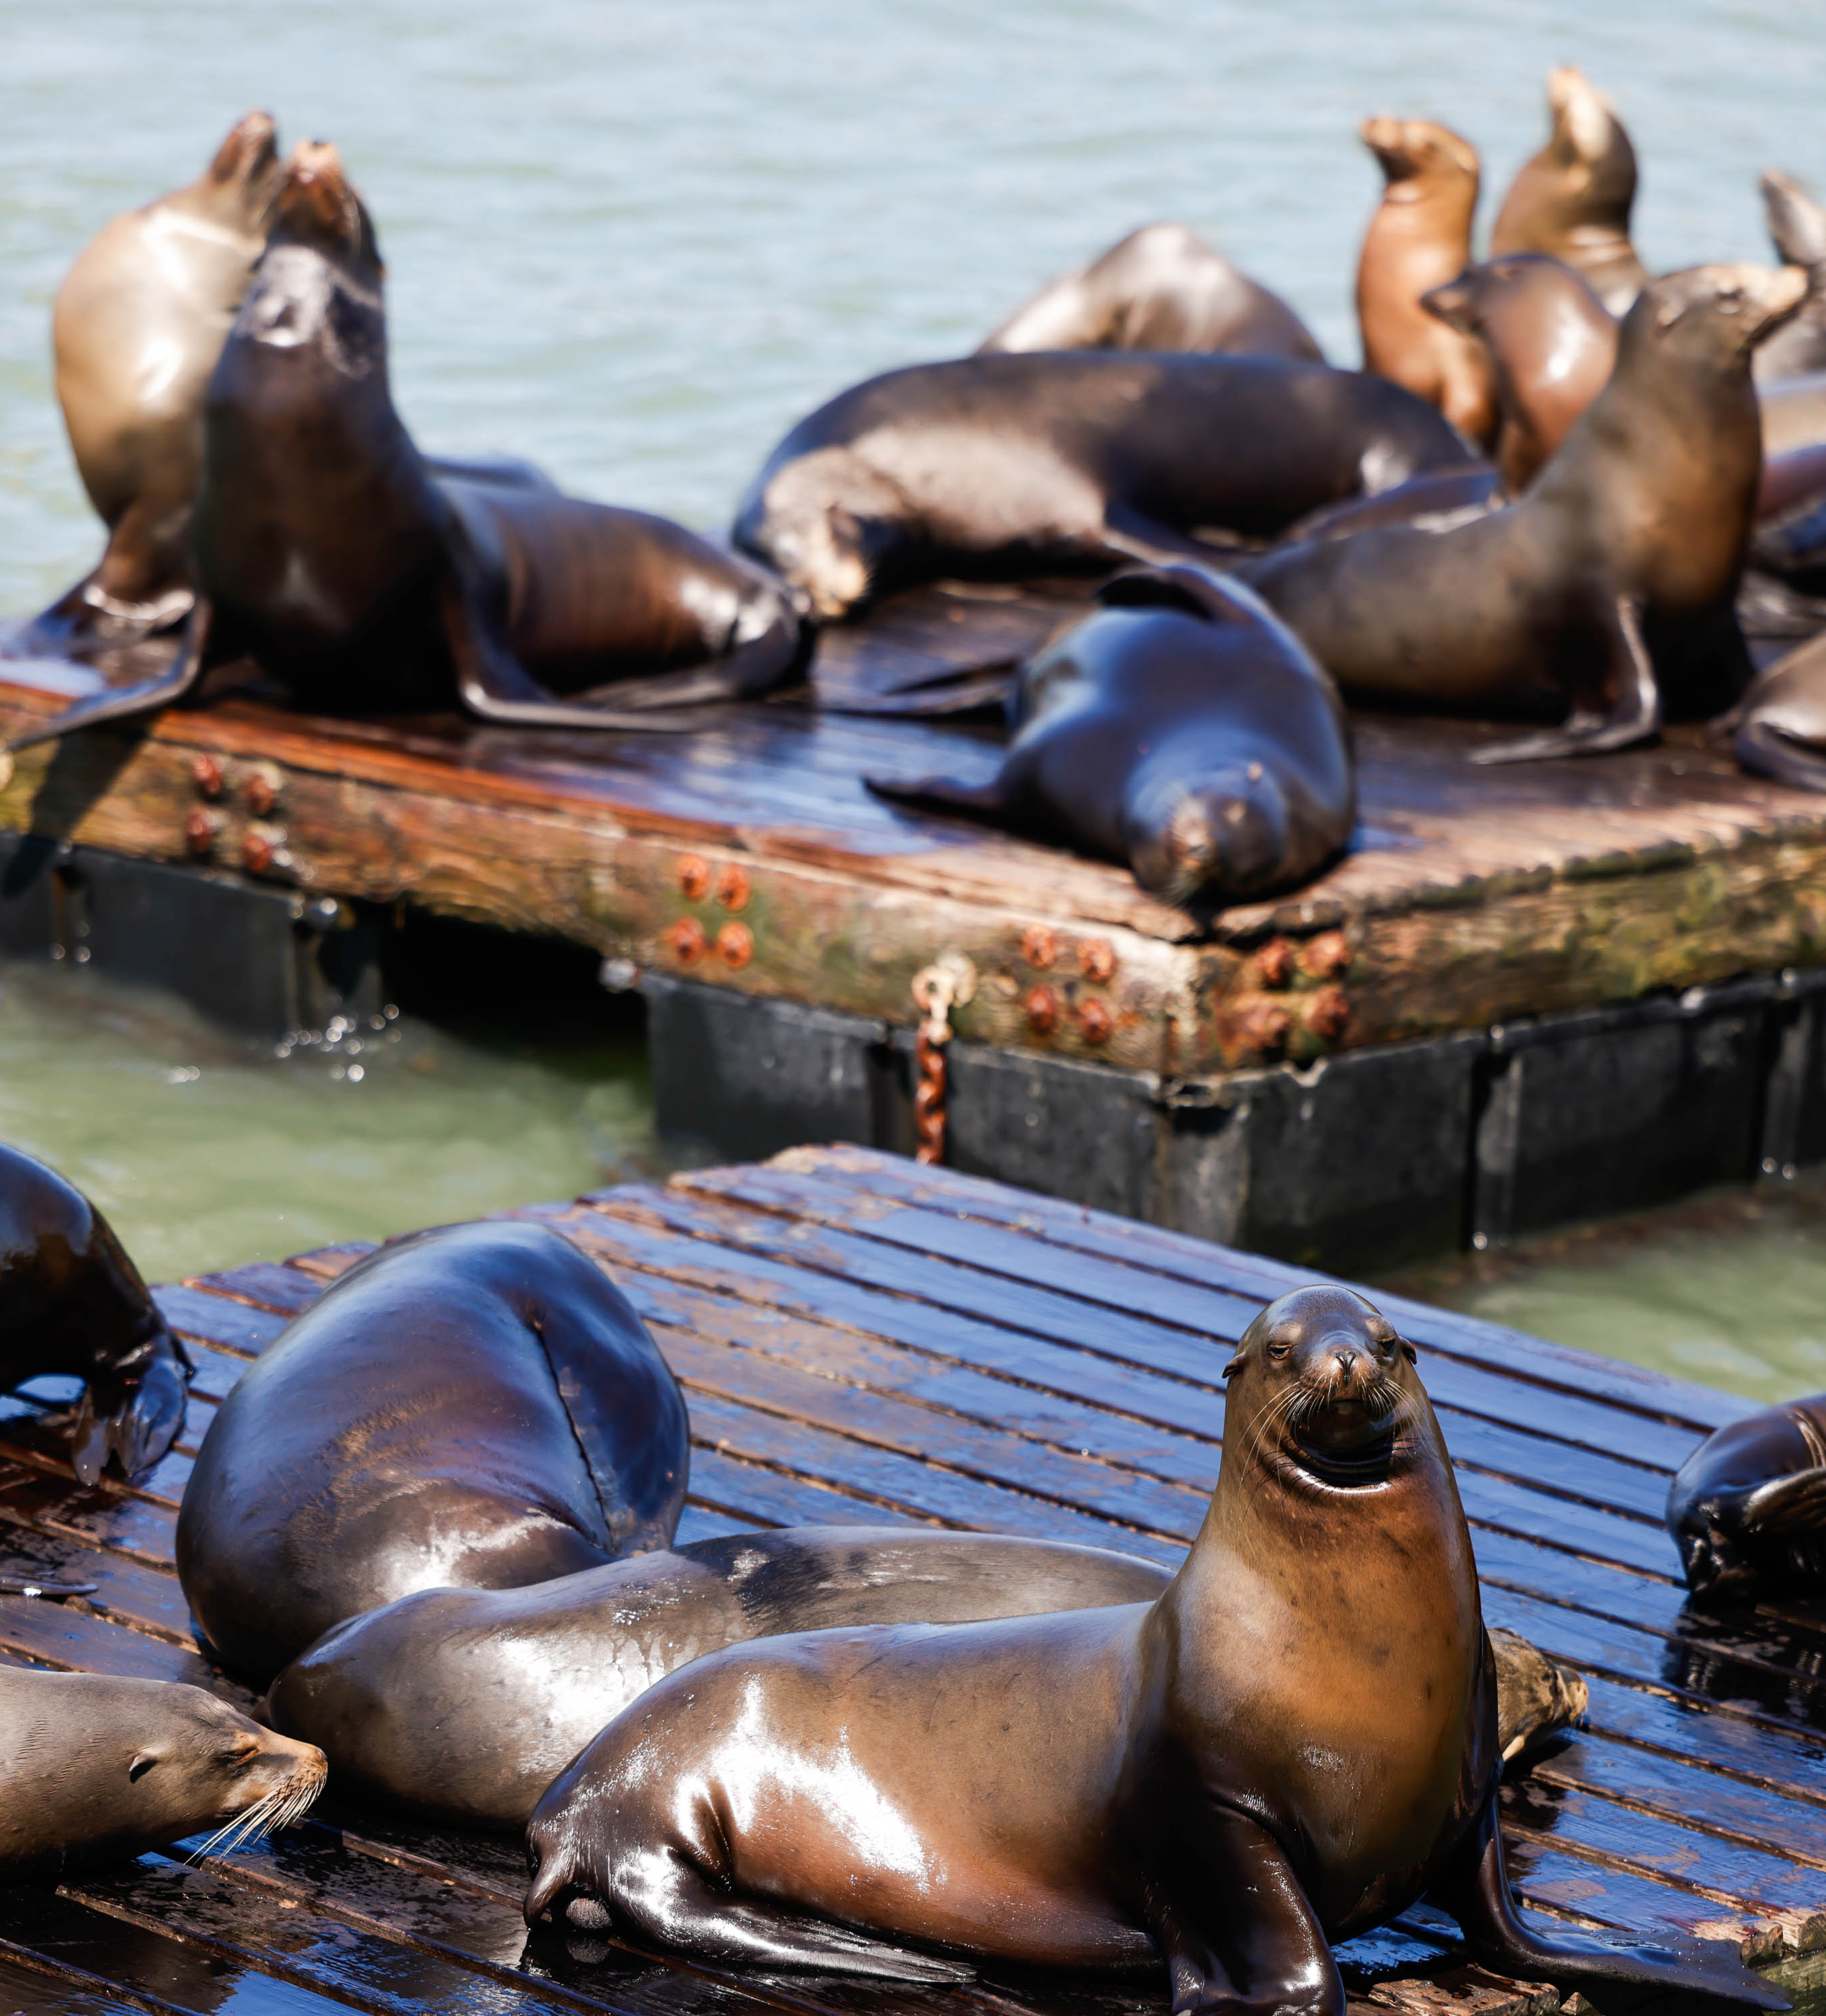 Sea lions lounging on a wooden dock, with one prominently posing in the foreground.